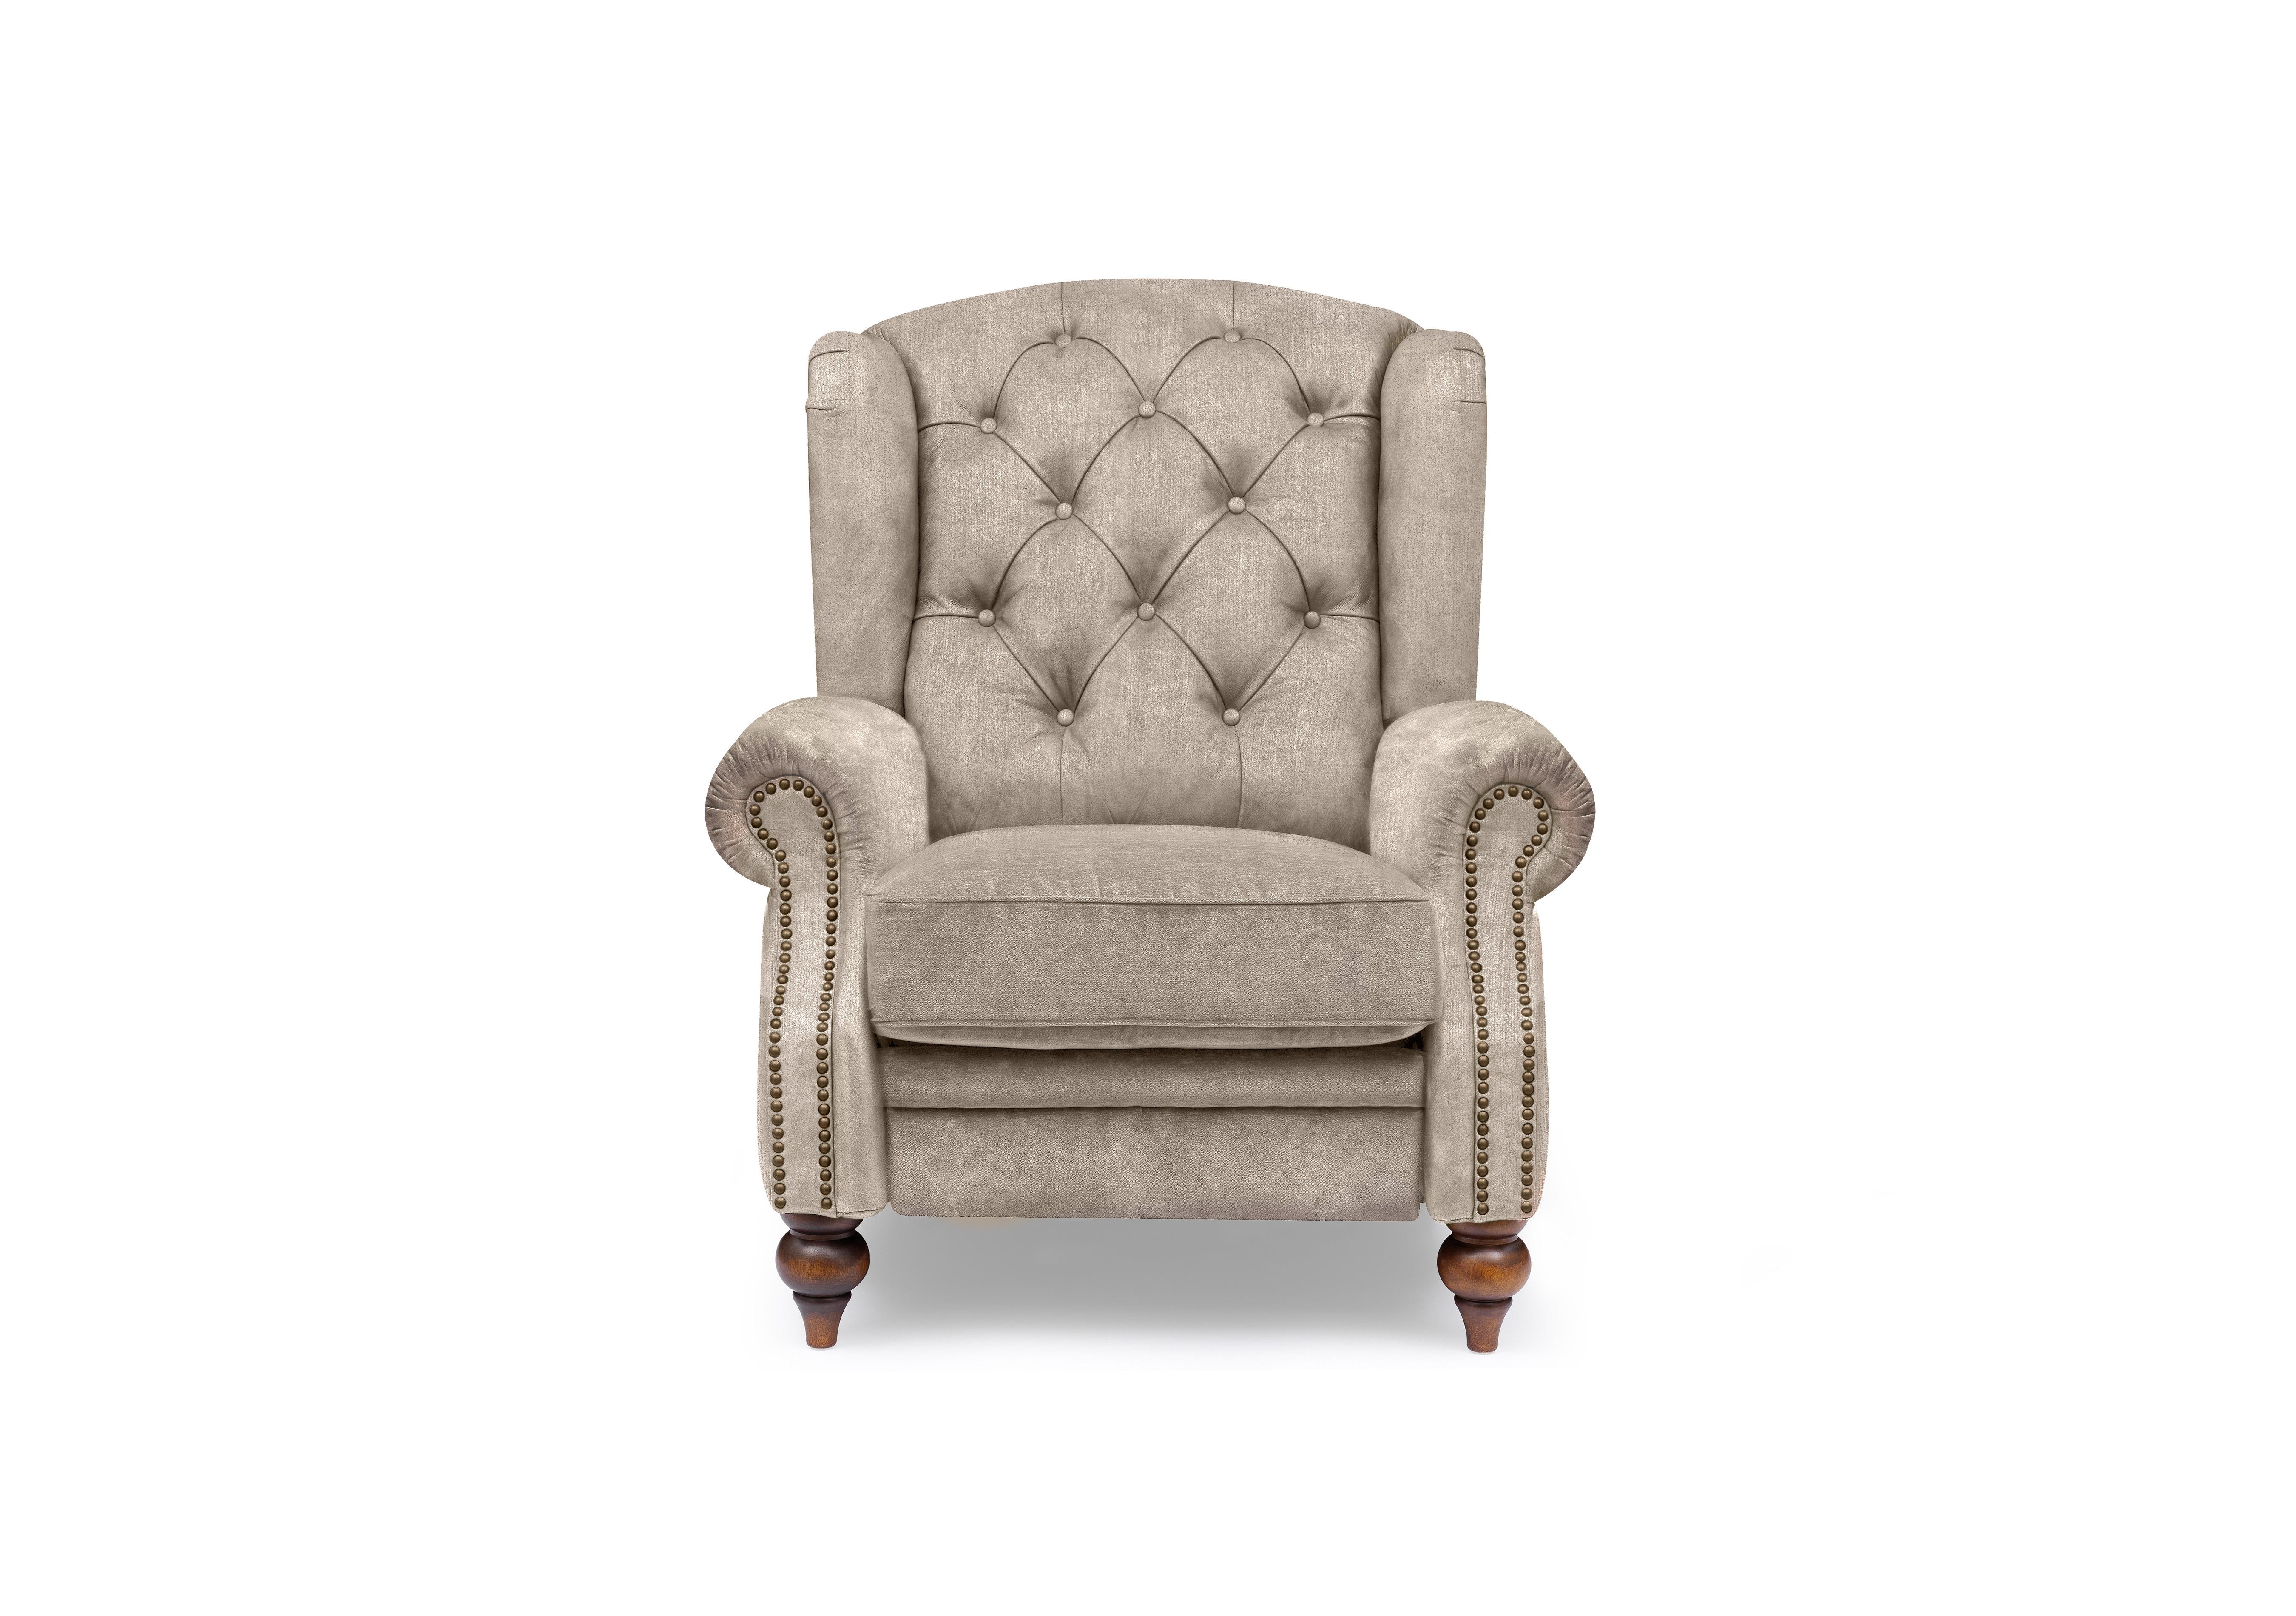 Shackleton Fabric Power Recliner Wing Chair in X3y1-W022 Barley on Furniture Village